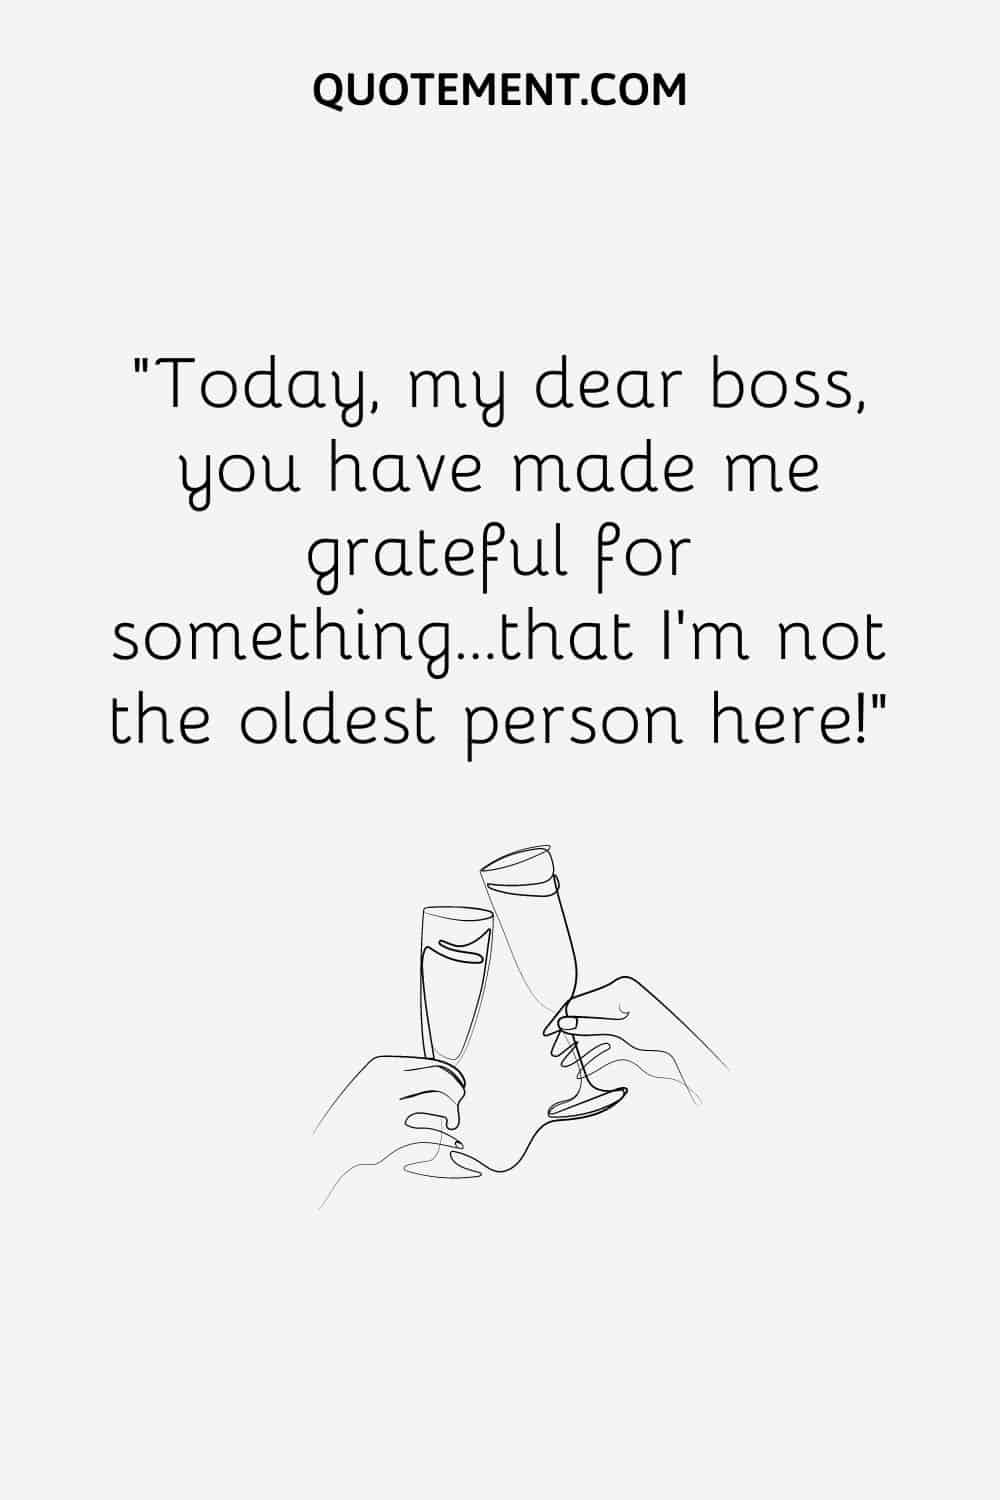 Today, my dear boss, you have made me grateful for something…that I’m not the oldest person here